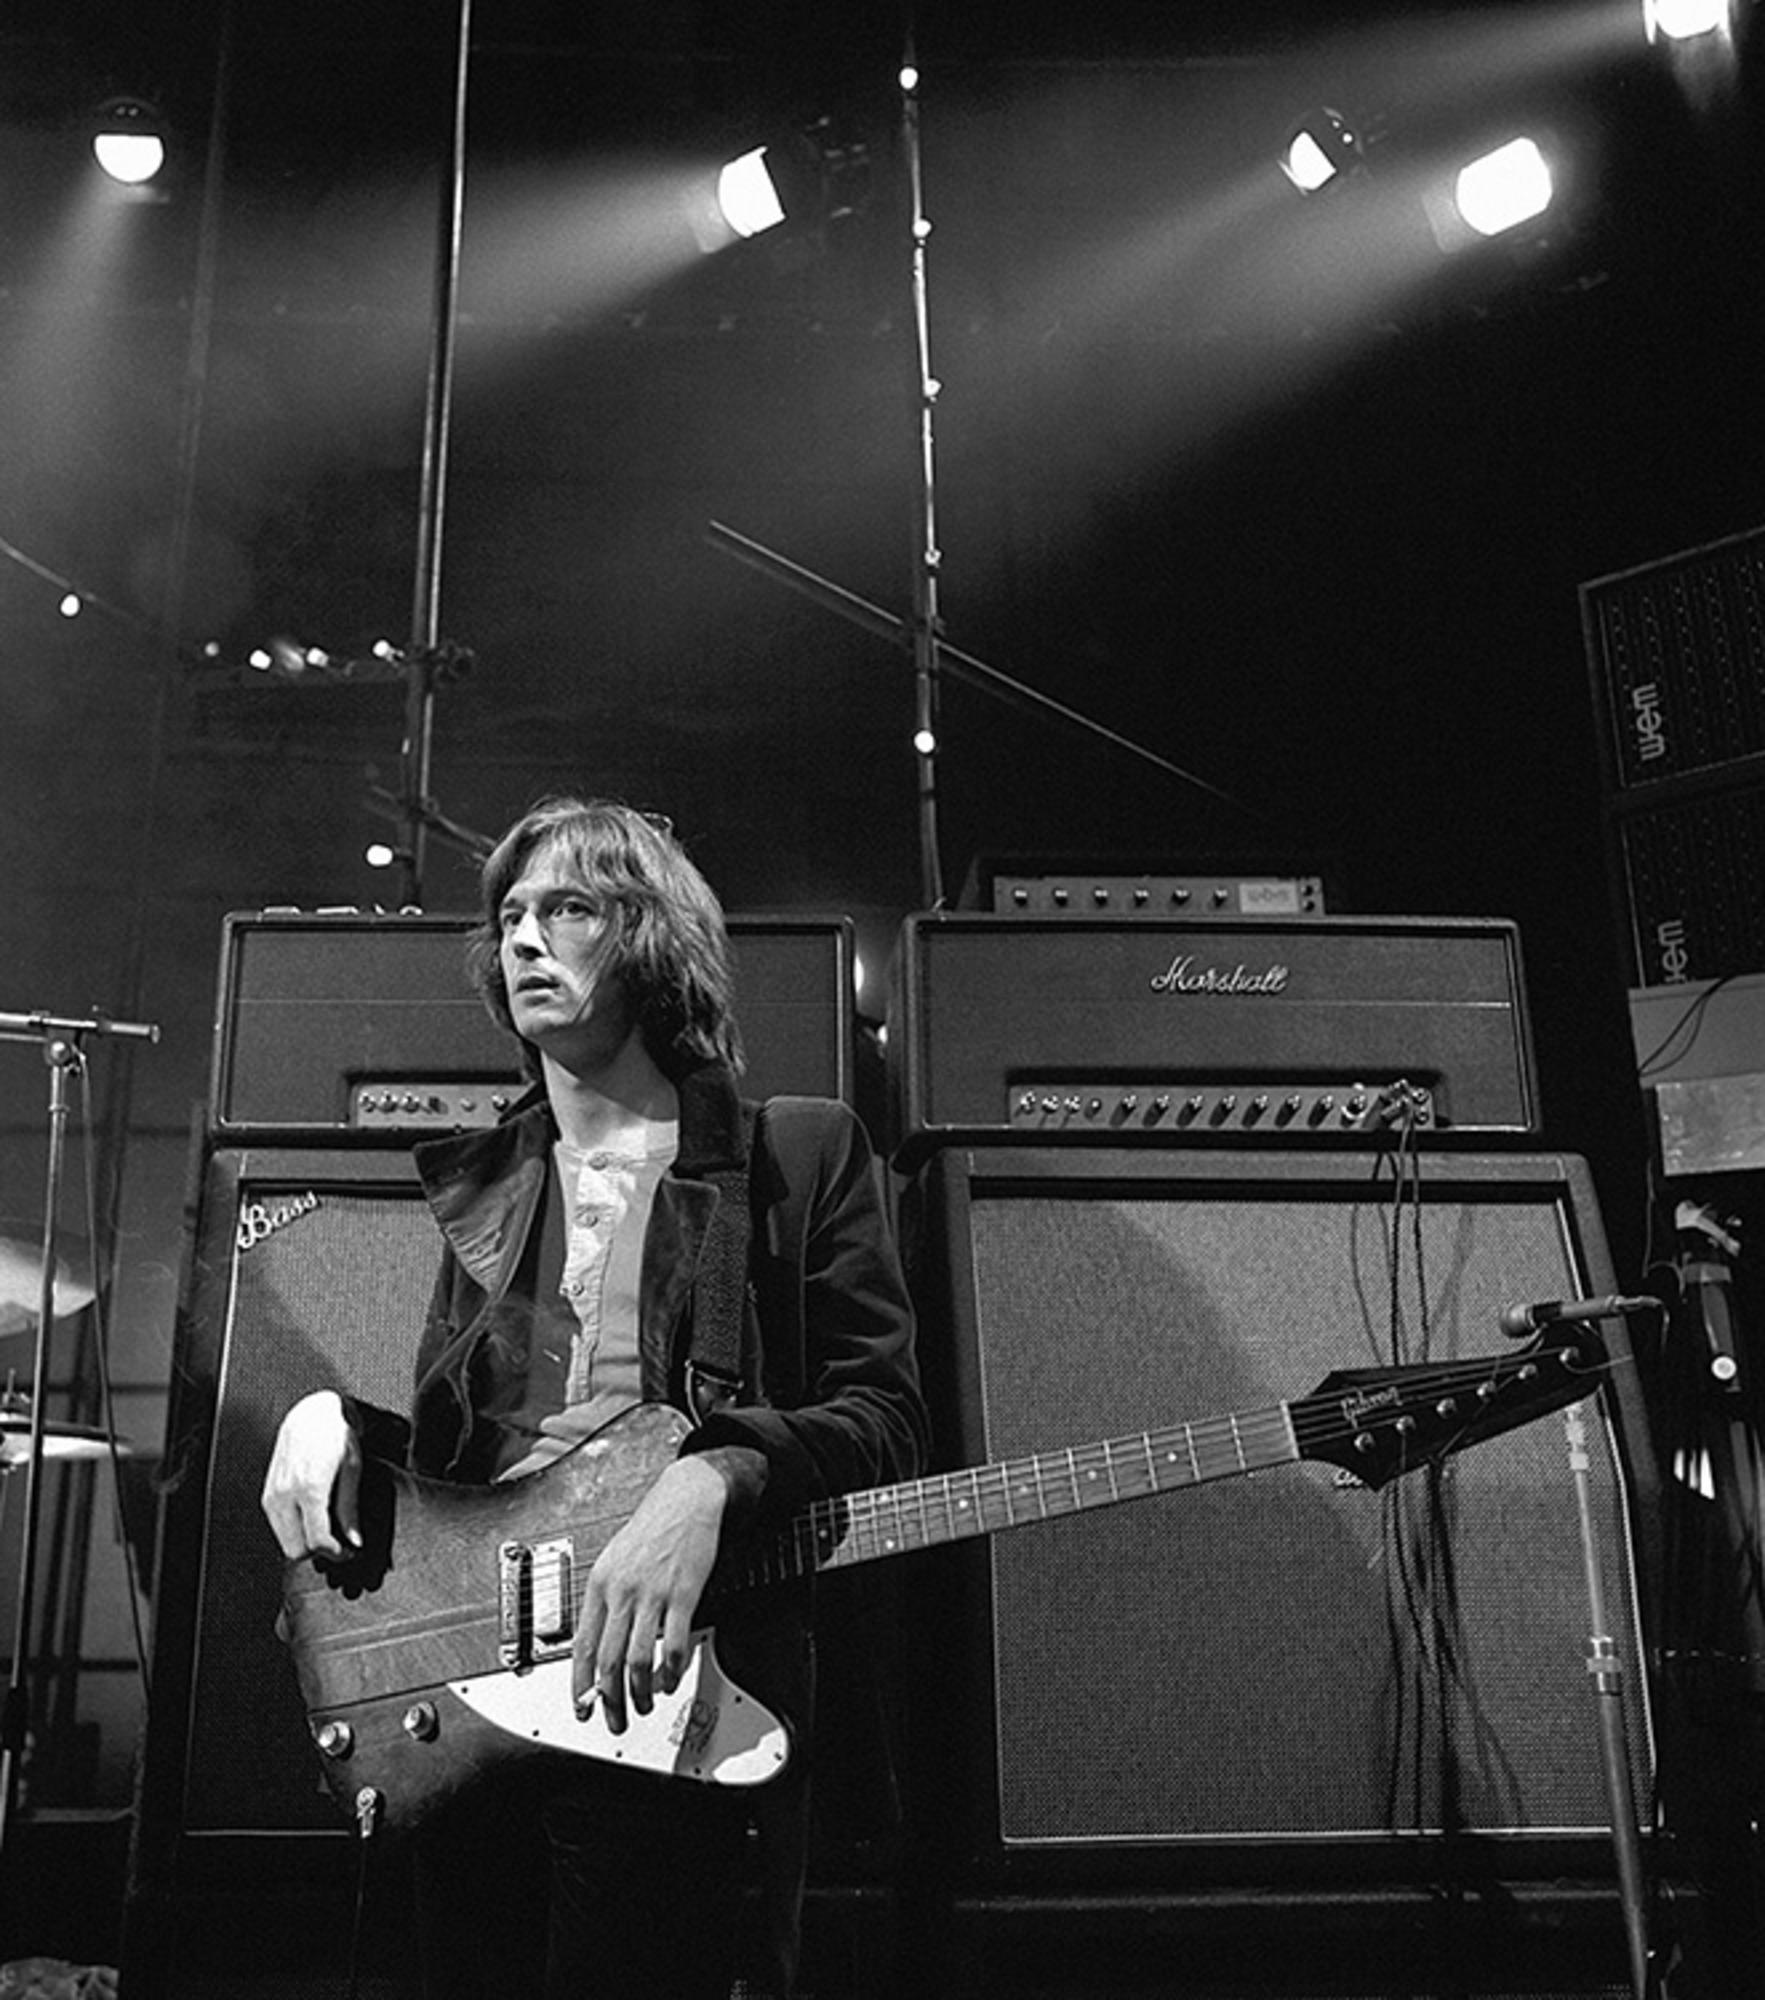 Gelatin-silver, signed and numbered

Eric Clapton, photographed in London, 1969.

Available Sizes:
16" x 20” Edition of 50
20" x 24” Edition of 50
30" x 40” Edition of 25
50” x 53” Edition of 24

This photograph will be printed once payment has been